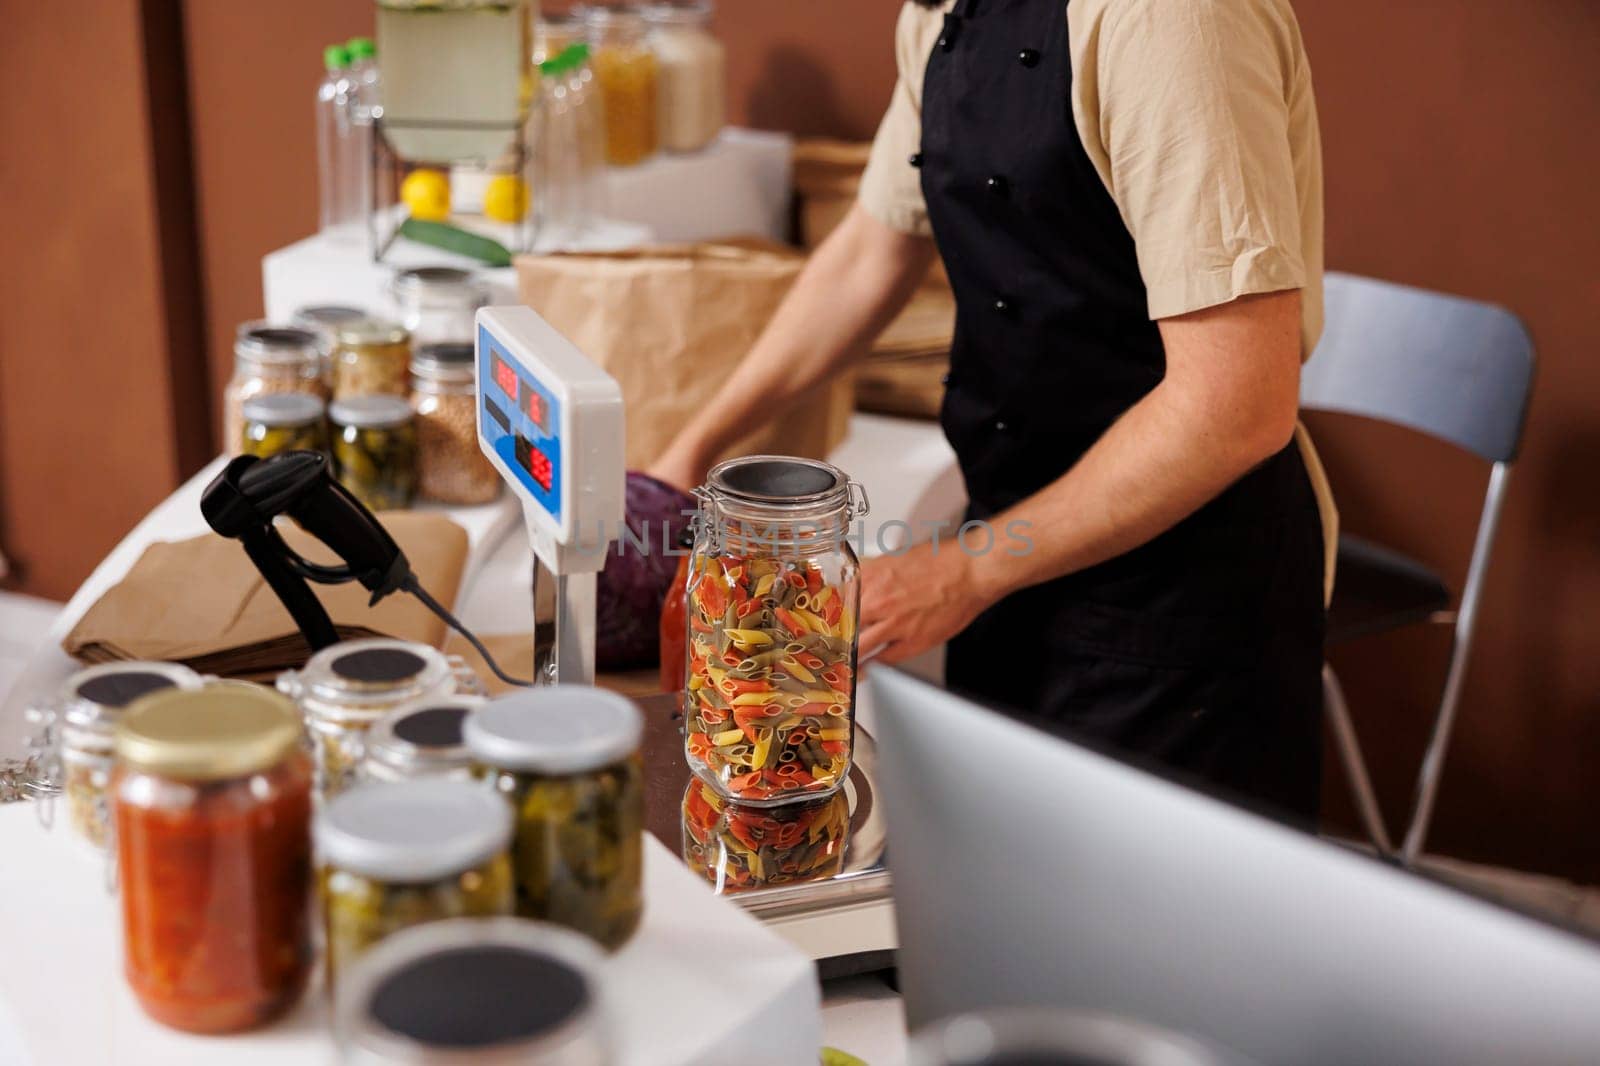 Storekeeper weighs and measures glass jar filled with colorful bio food products, on a weight scale. Male cashier wears a black apron and monitors the values showing up on digital measuring equipment.